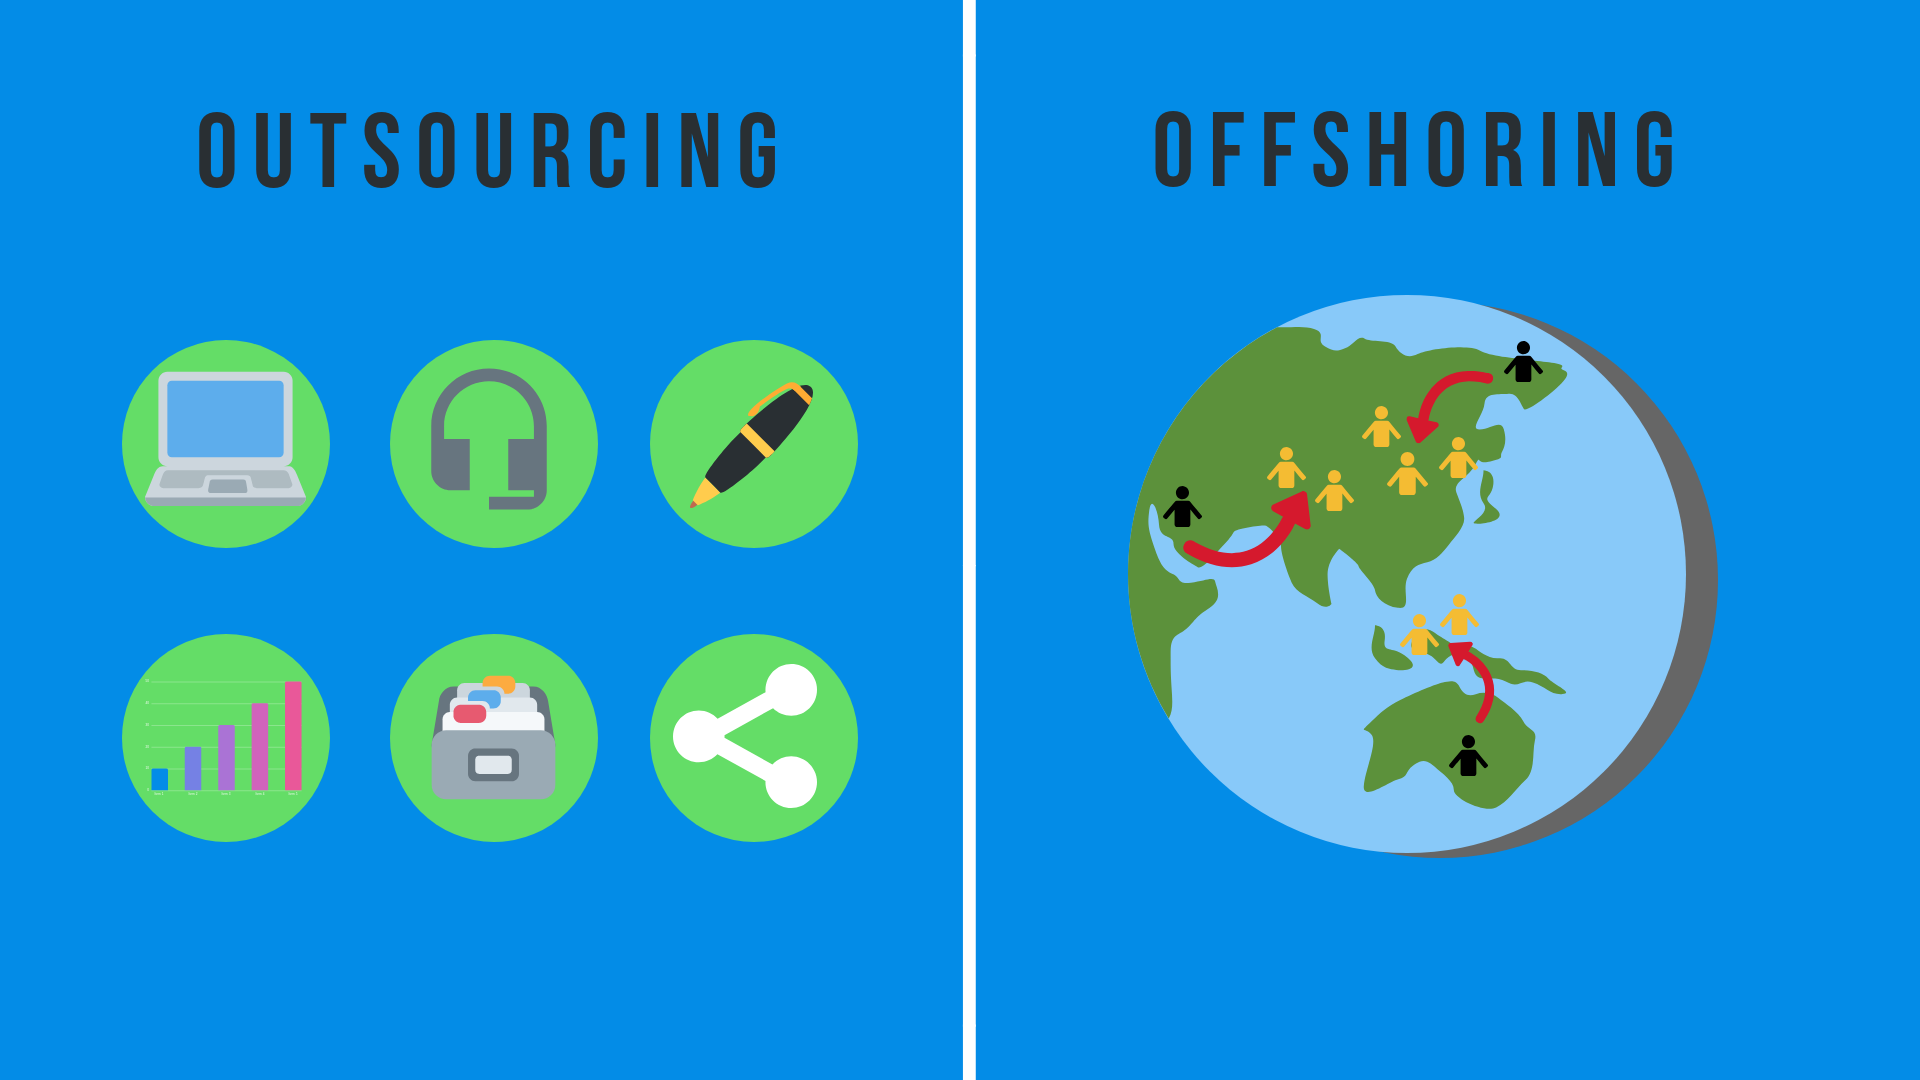 What Is The Difference Between Outsourcing and Offshoring?